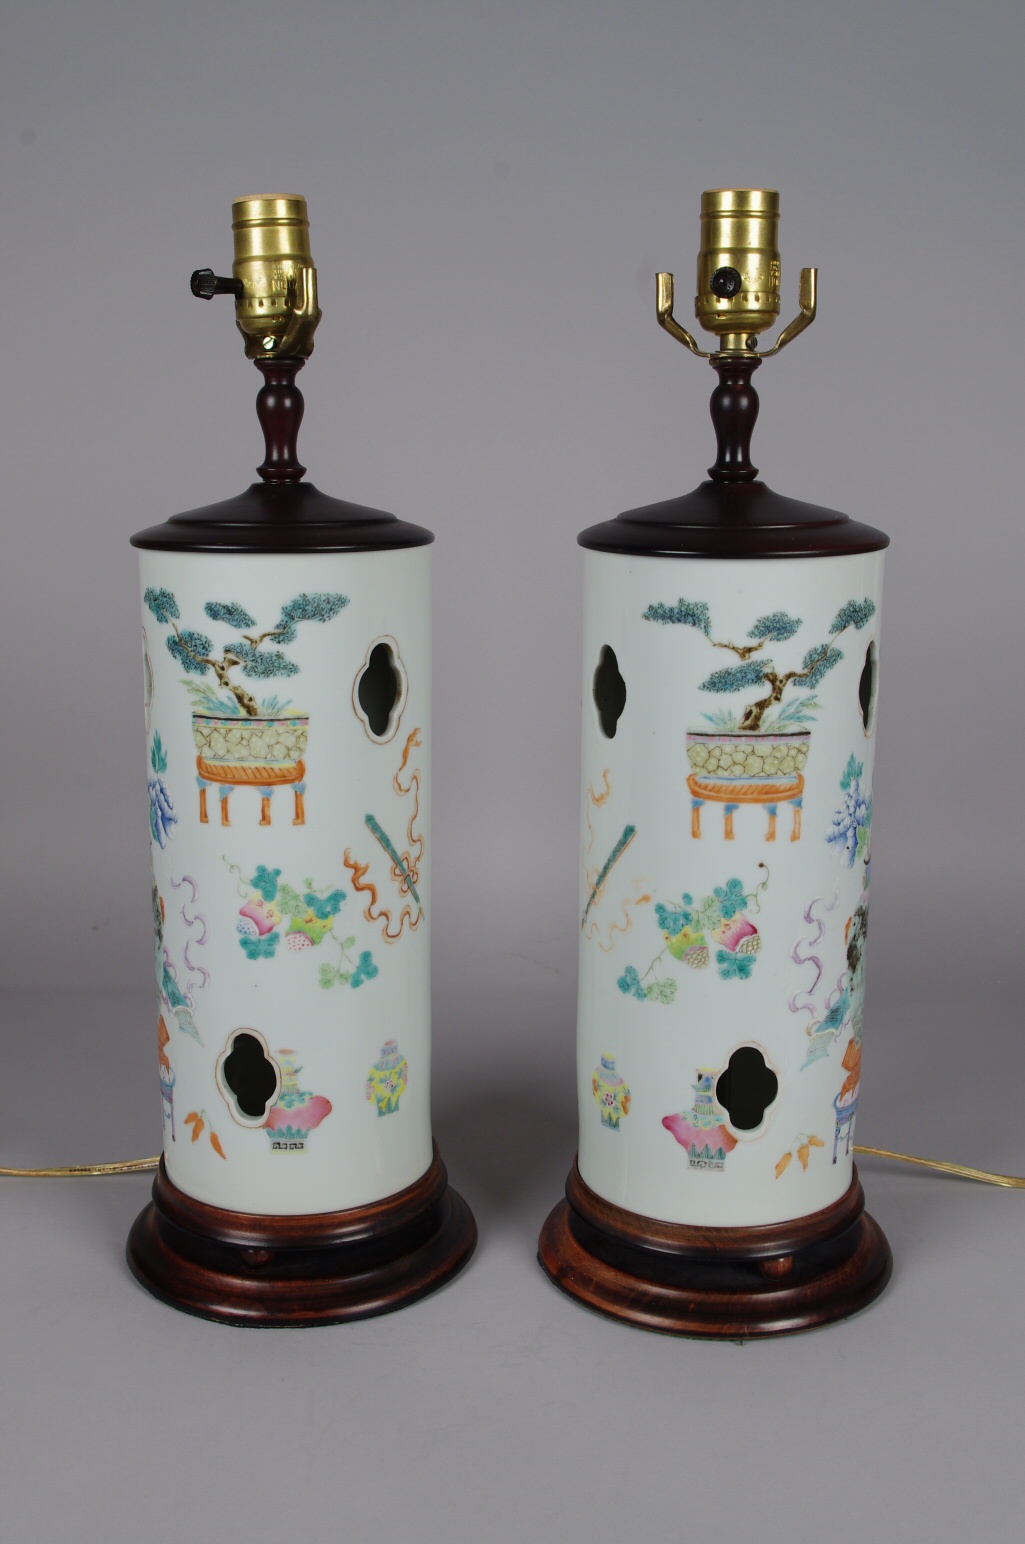 Pair of Chinese Porcelain Hat Stands Mounted as Lamps